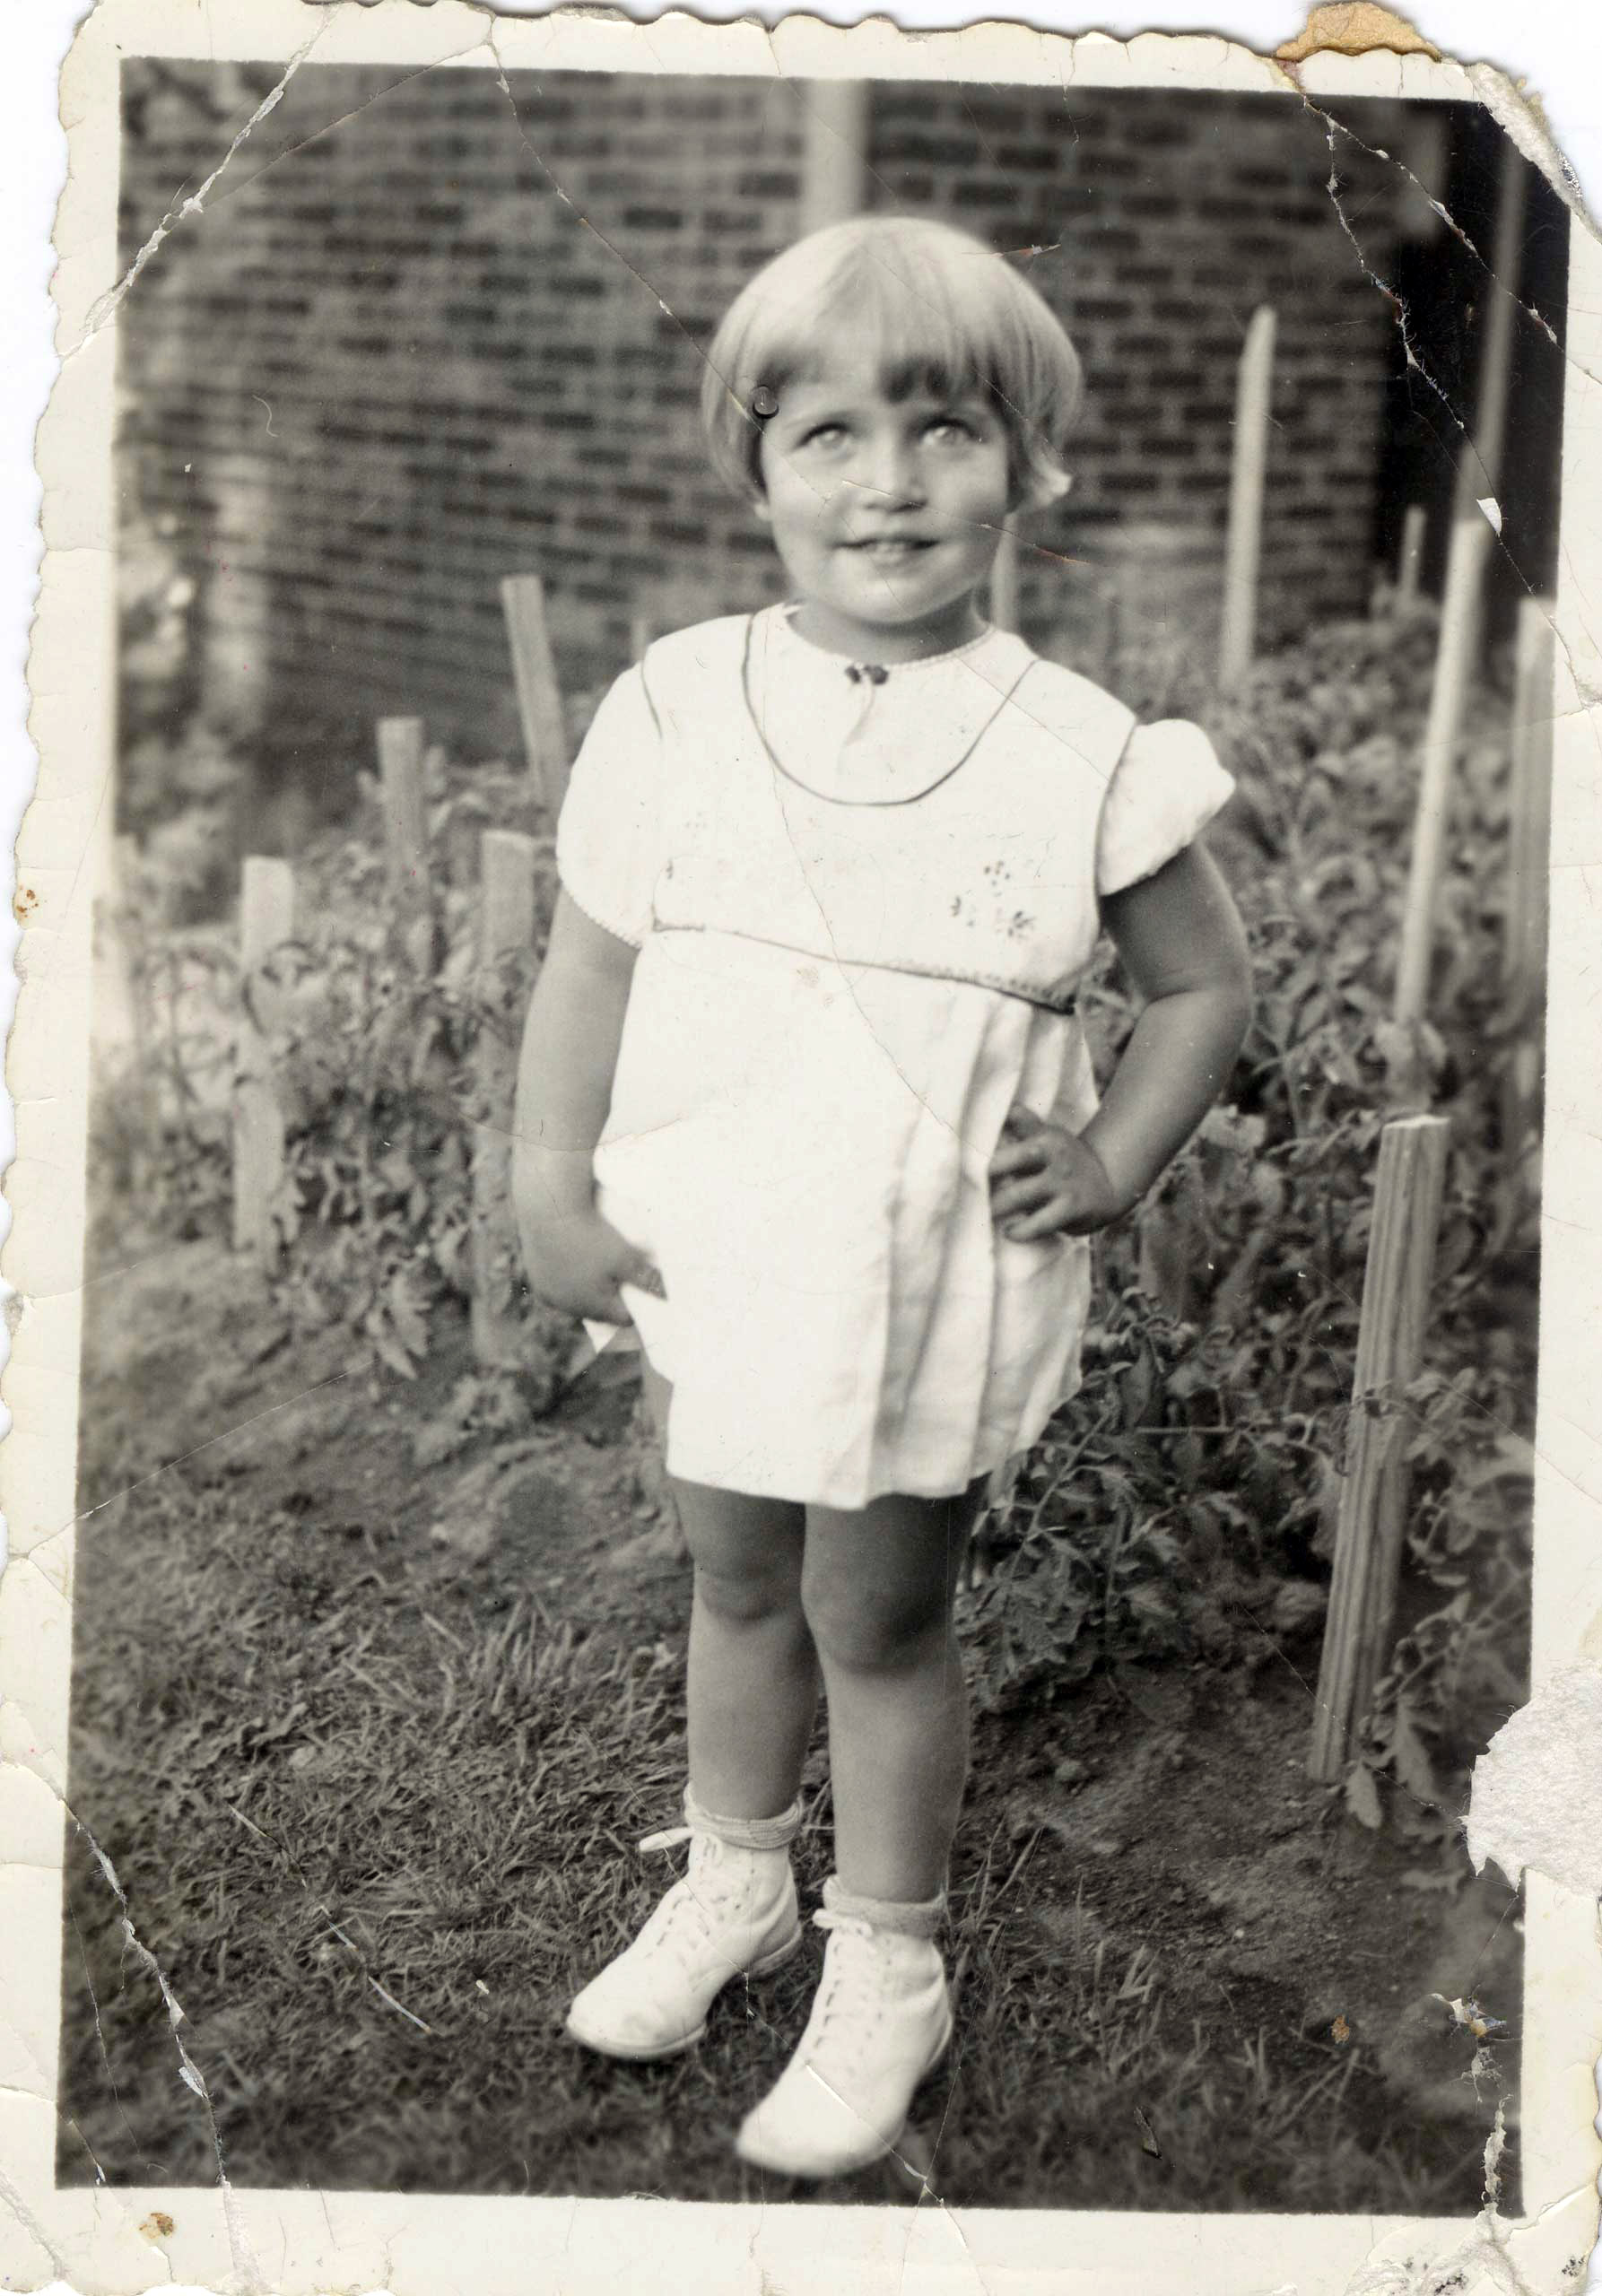 <b>August 2, 1935</b> Childhood photograph of Ruth Bader taken when she was two years old. (Collection of the Supreme Court of the United States)